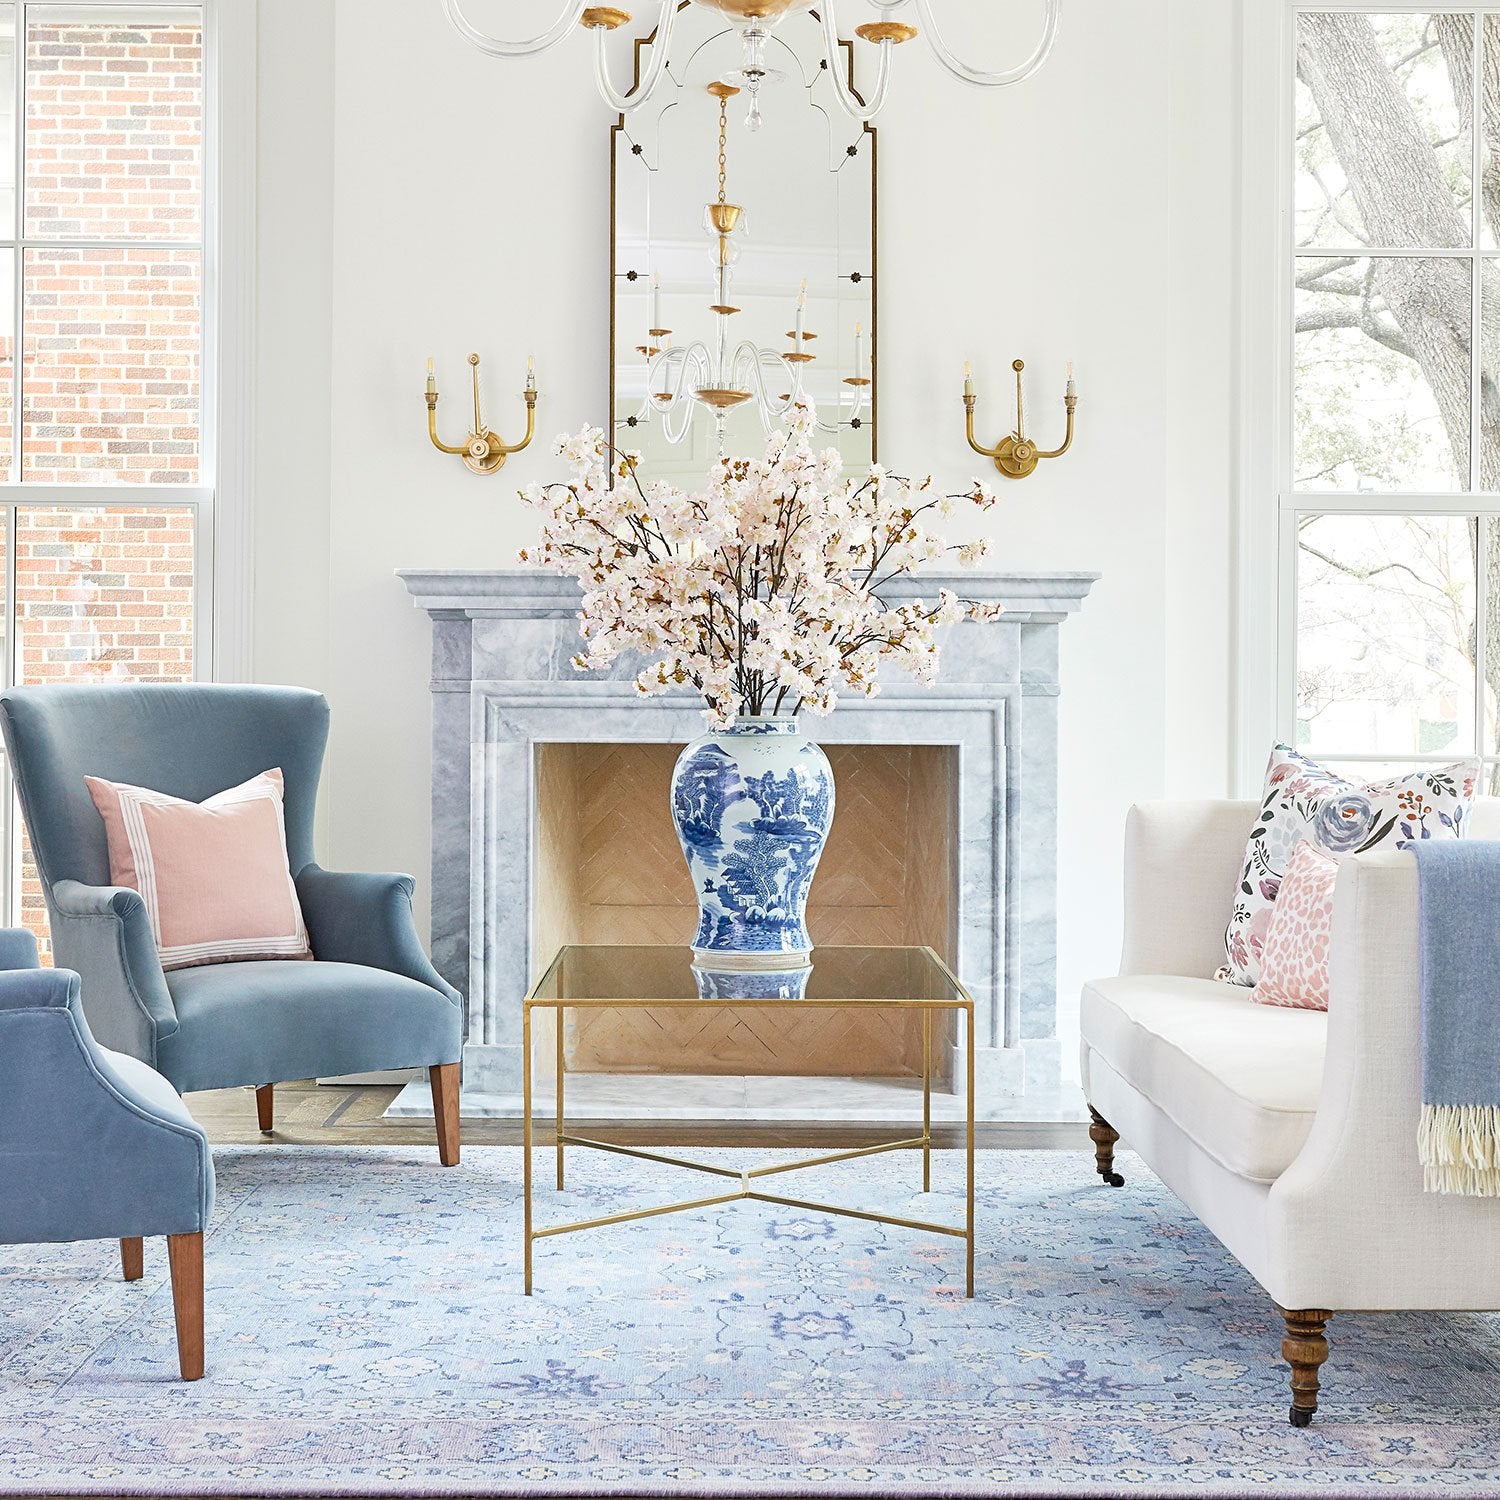 Blue Pasha Rug in Living Room